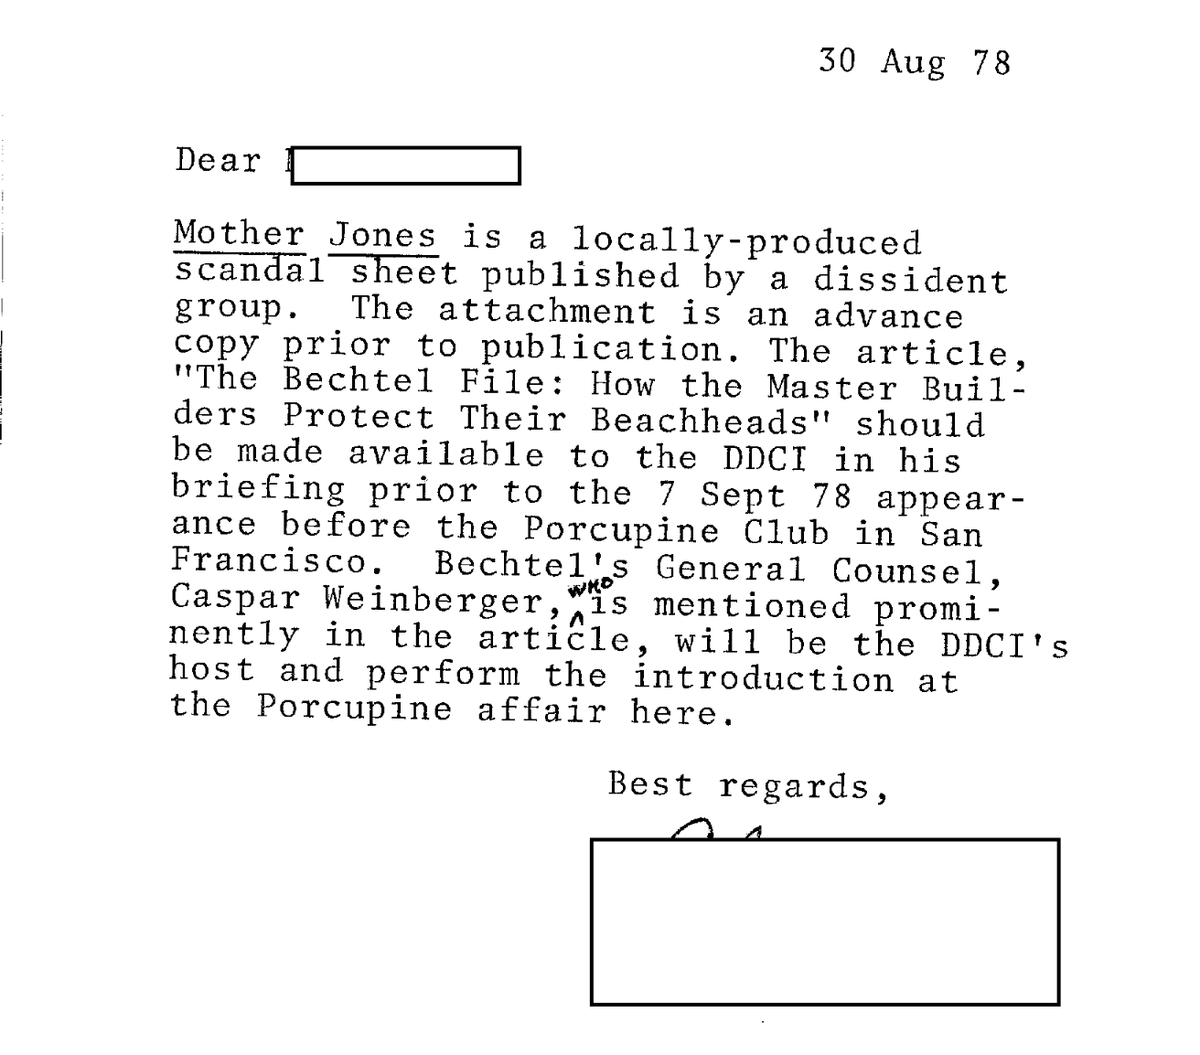 you can also find our Bill Walton cover in the CIA's files, with a helpful note about another story in the issue, about the Bechtel Corporation cia.gov/readingroom/do…